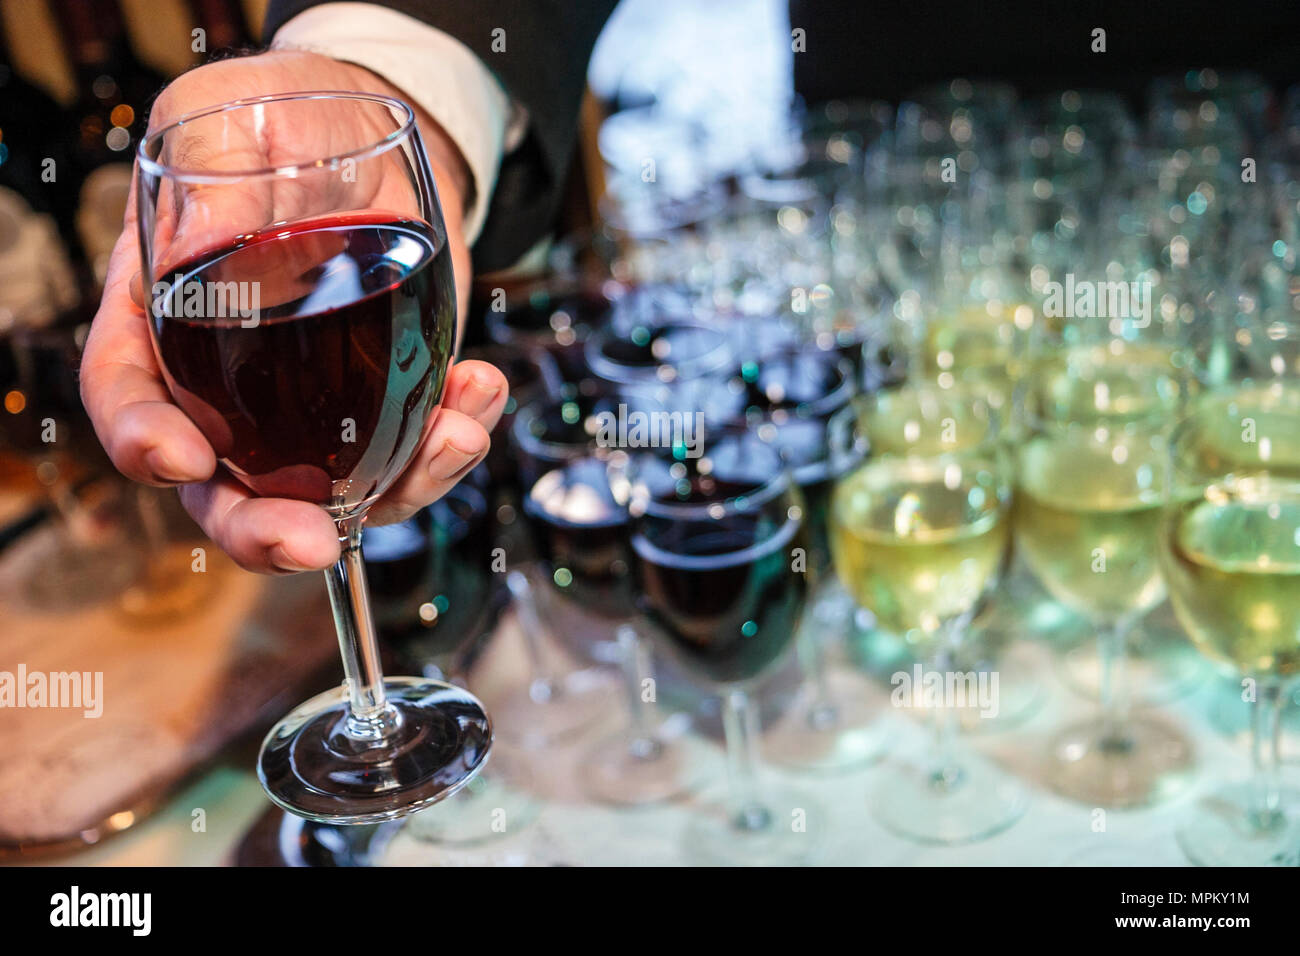 Quebec Canada,Upper Town,Hilton,hotel,reception,party,wine glass,red,white,Canada070709043 Stock Photo